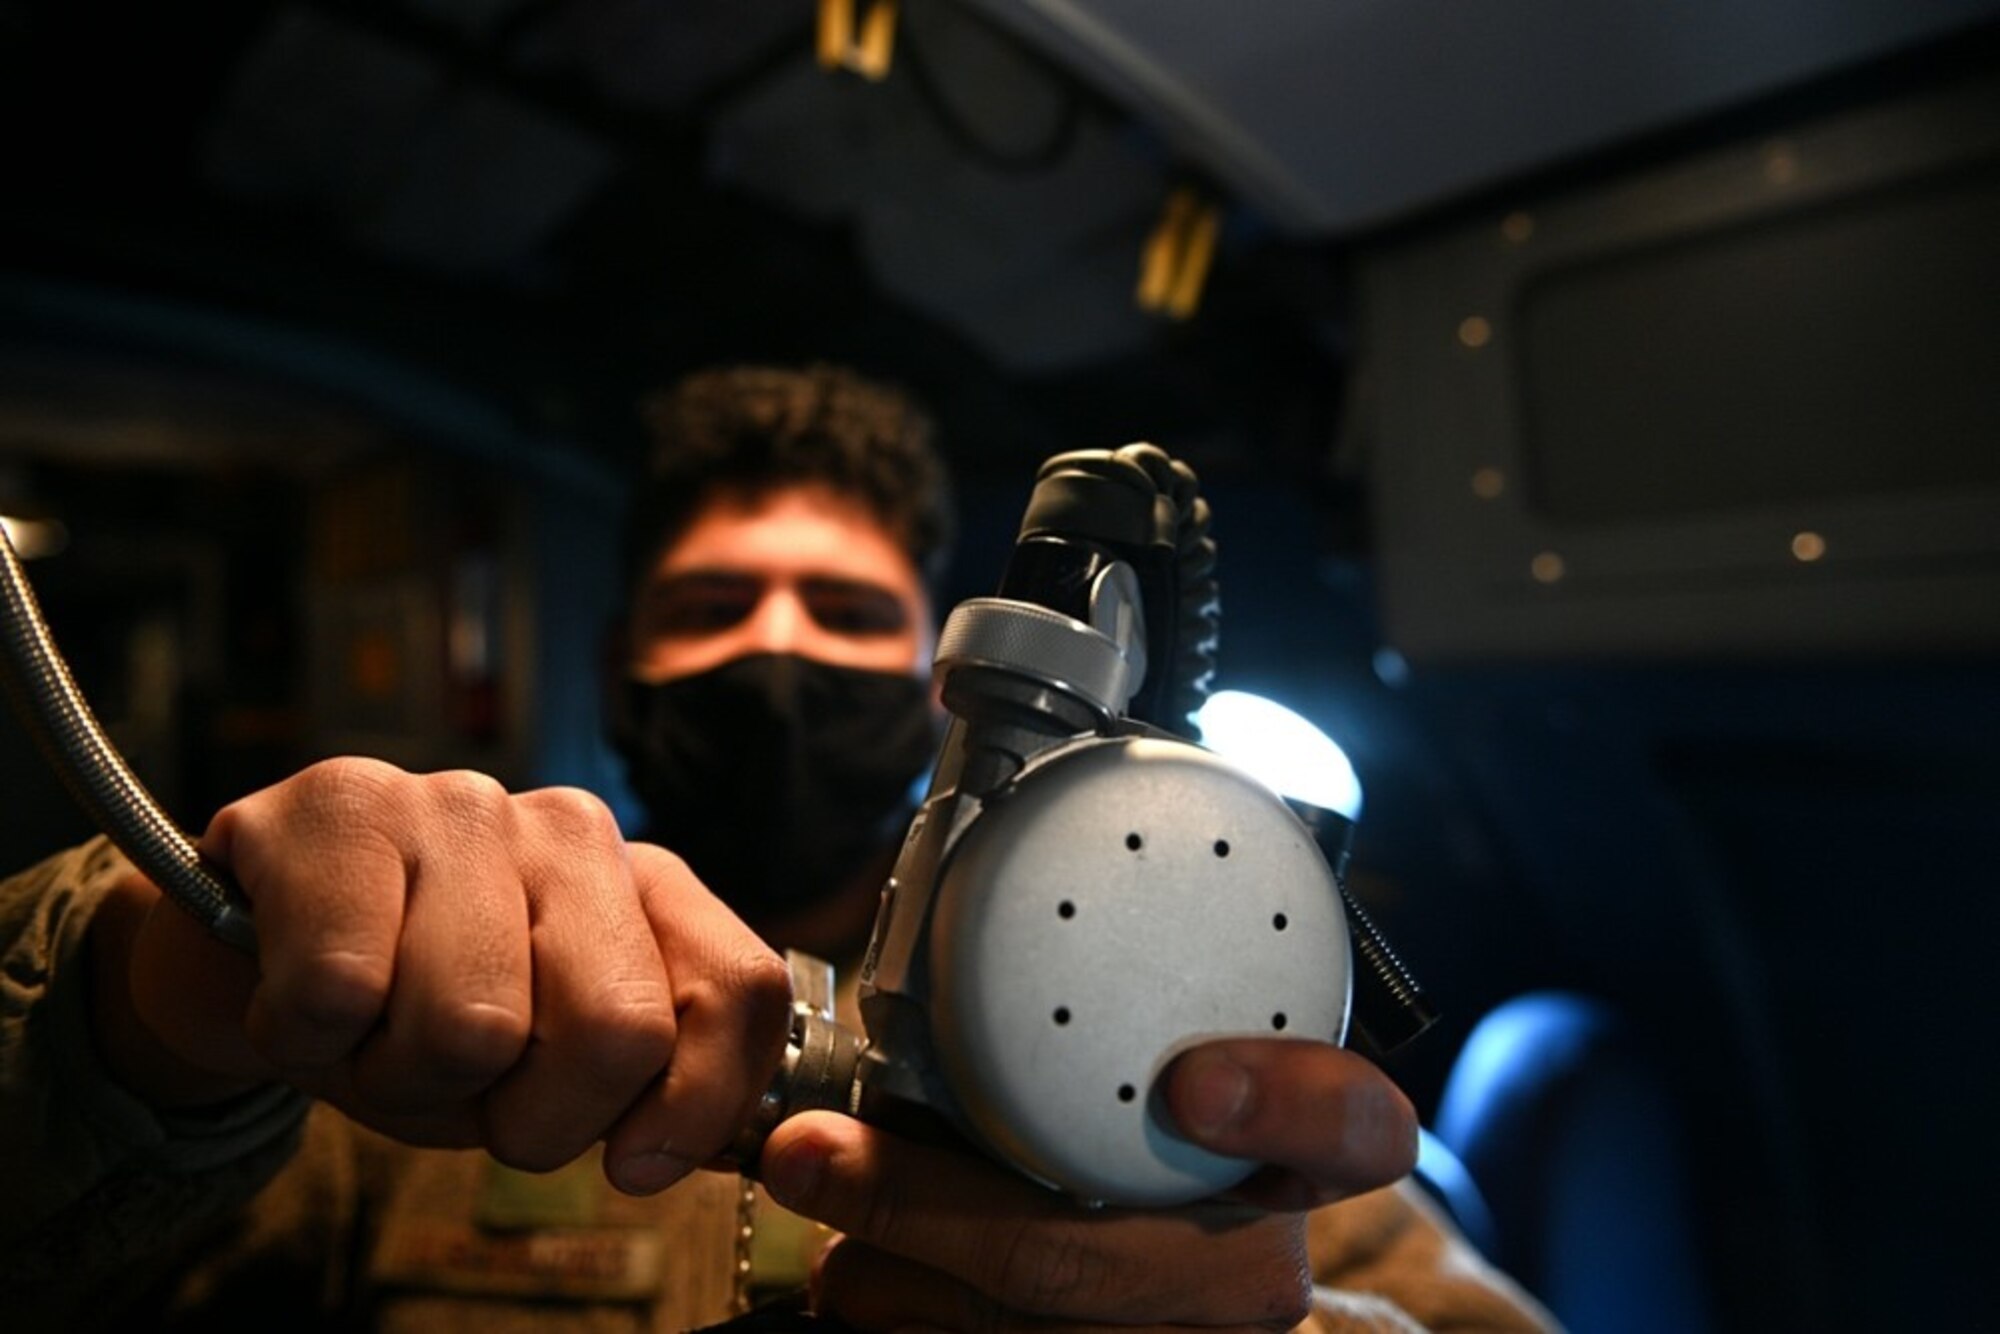 An Airman in a mask works electronics on a headset